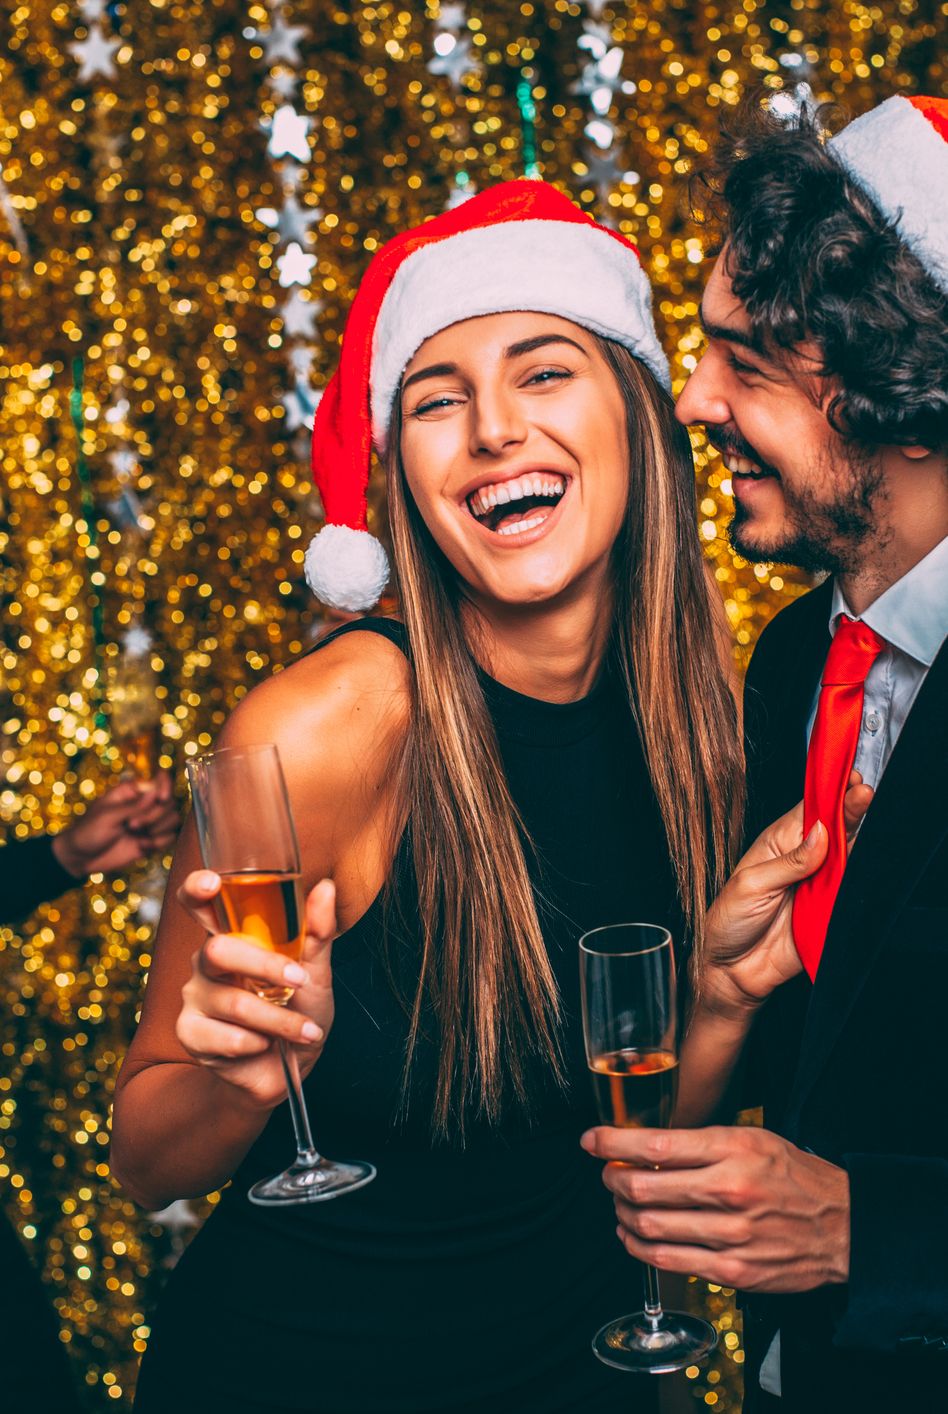 55 Best Christmas Party Ideas for an Holiday